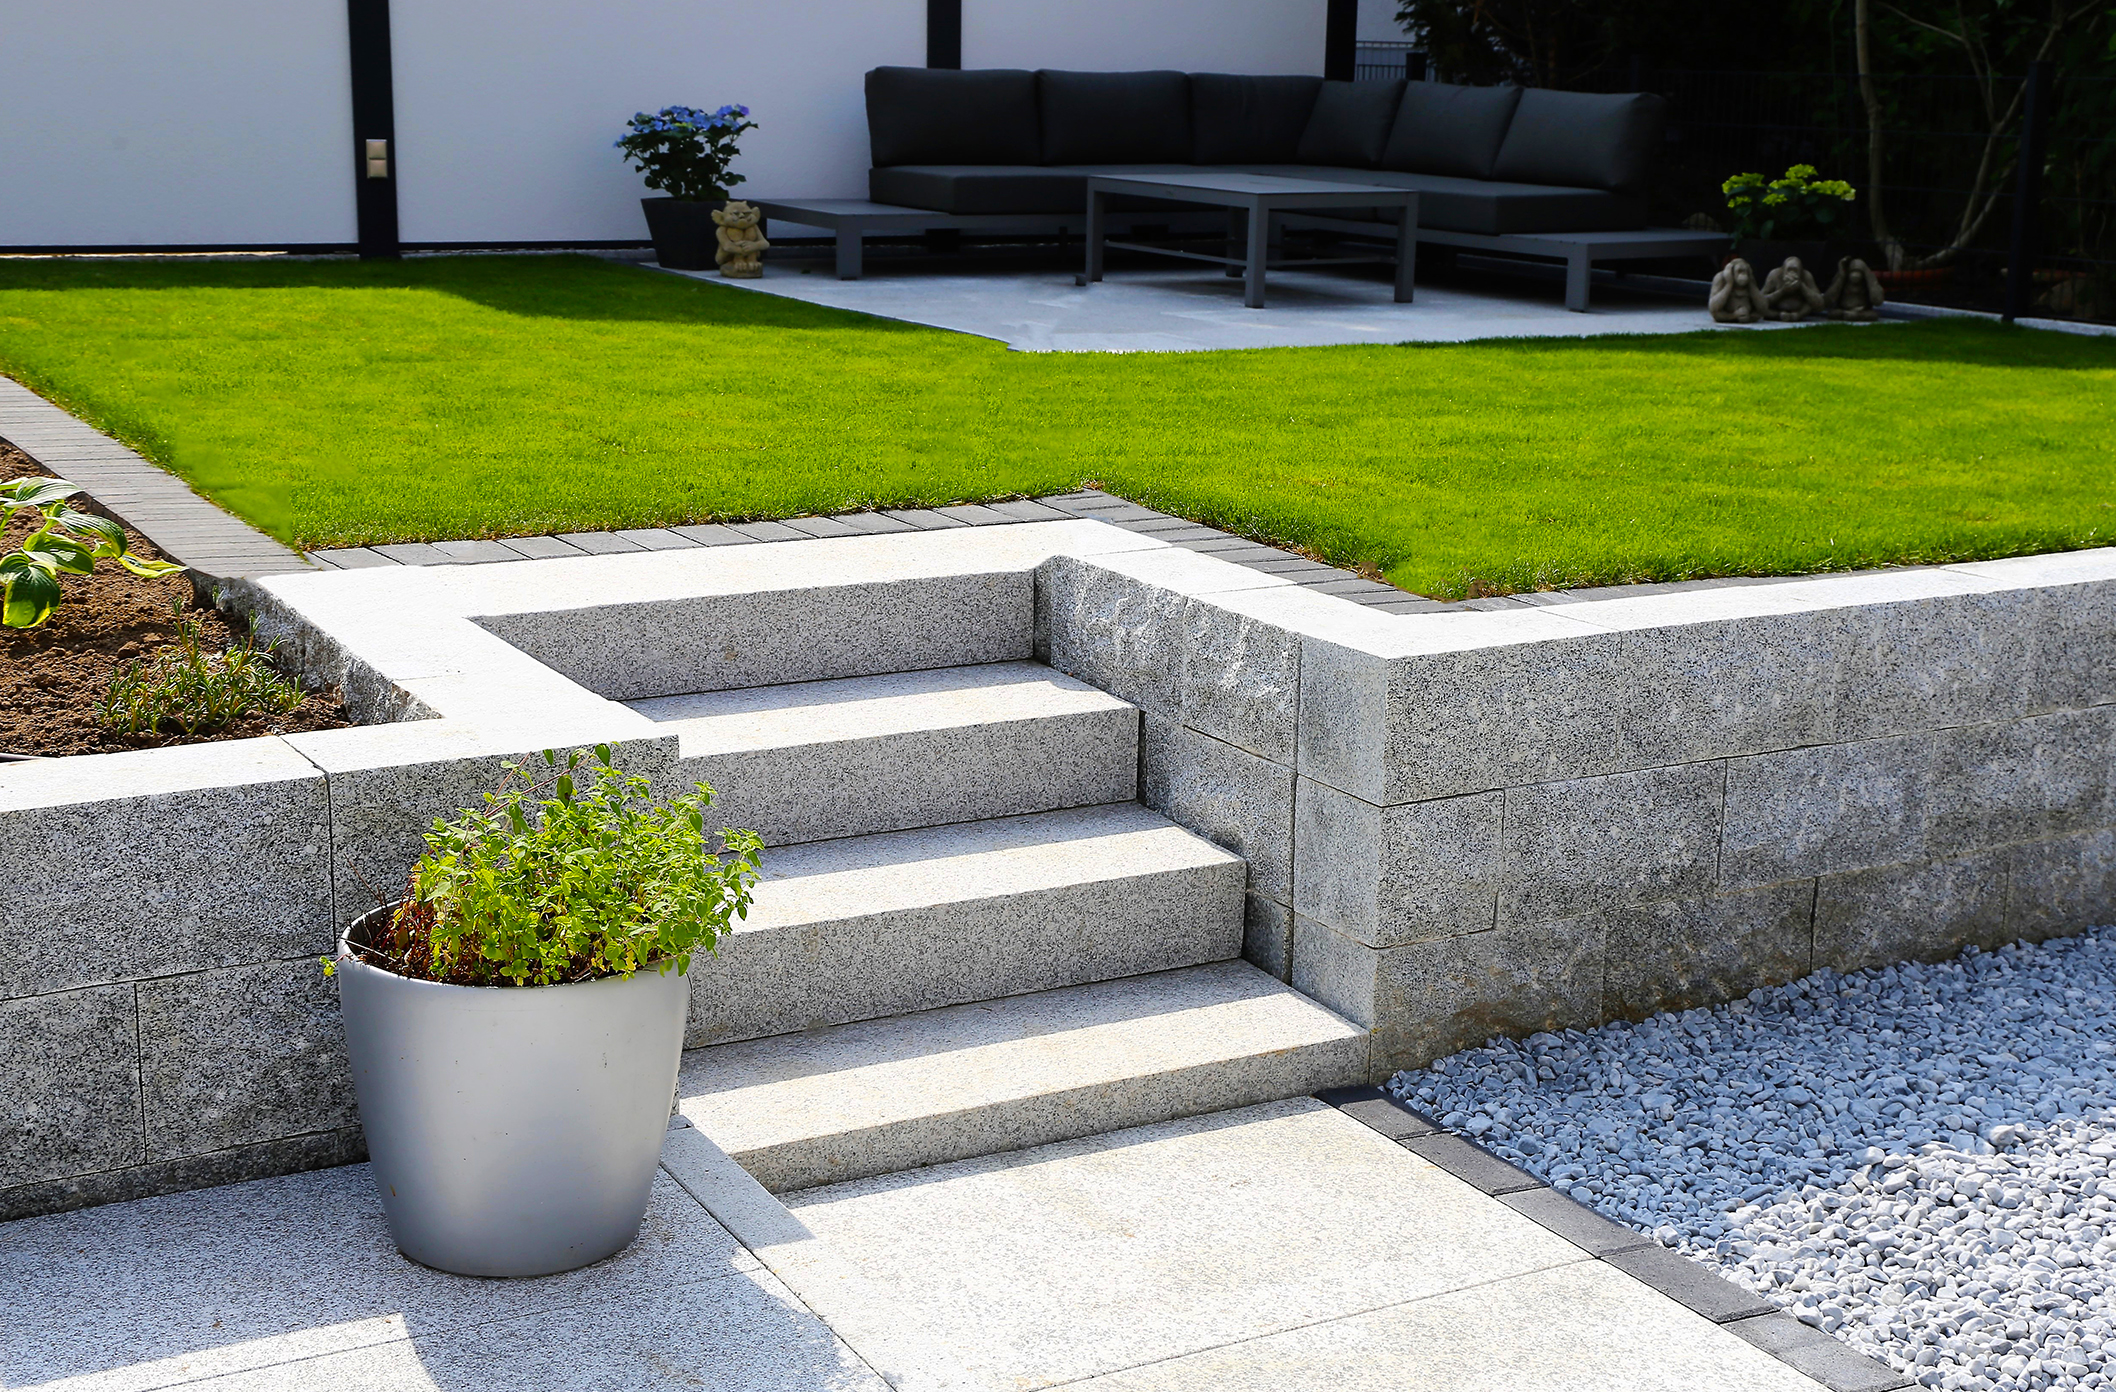 Building and landscaping services in St Albans